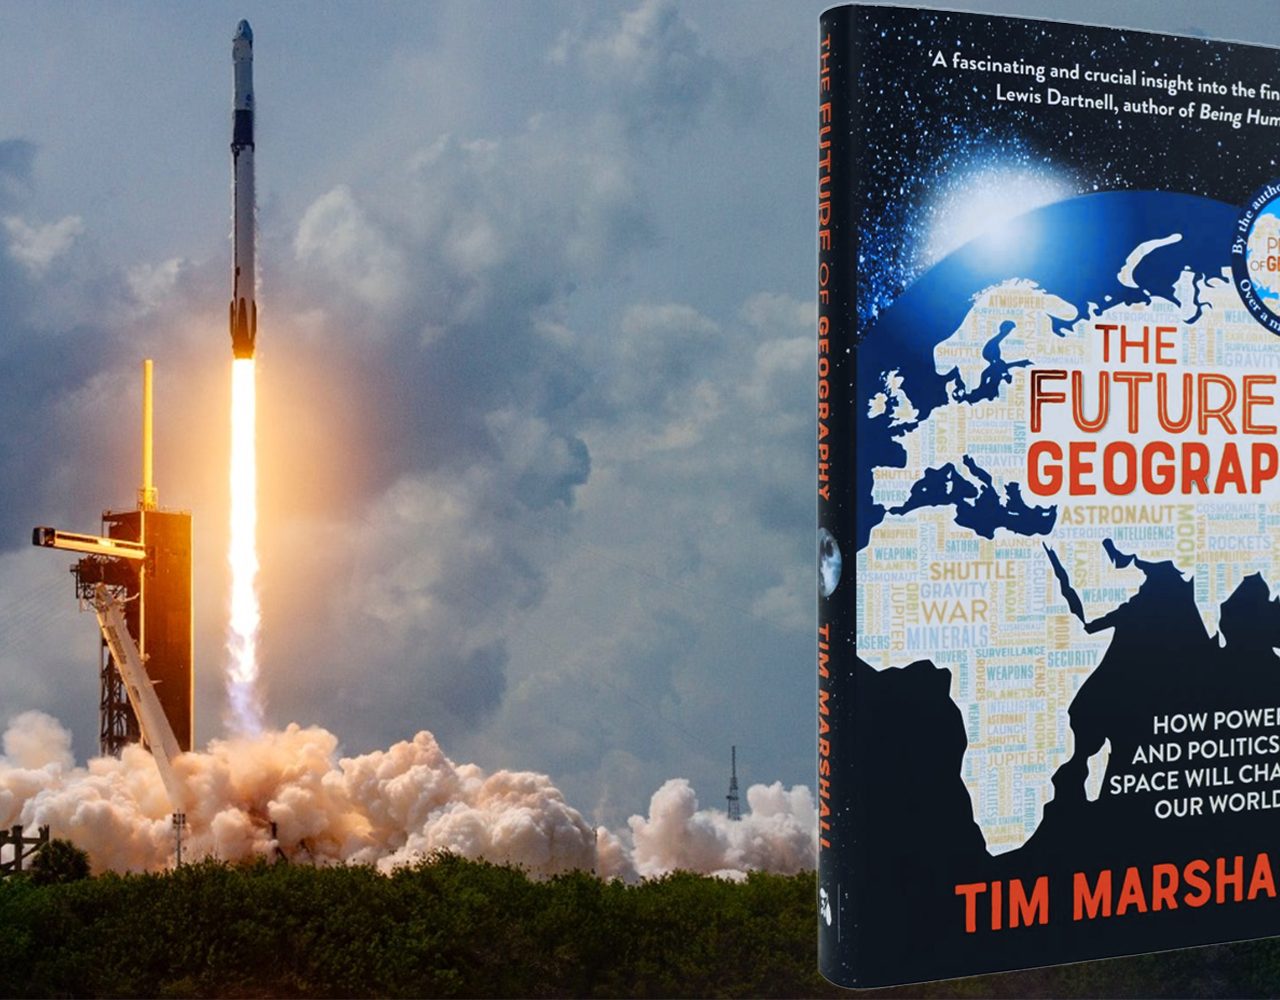 Book Review: The Future of Geography: How Power and Politics in Space Will Change Our World